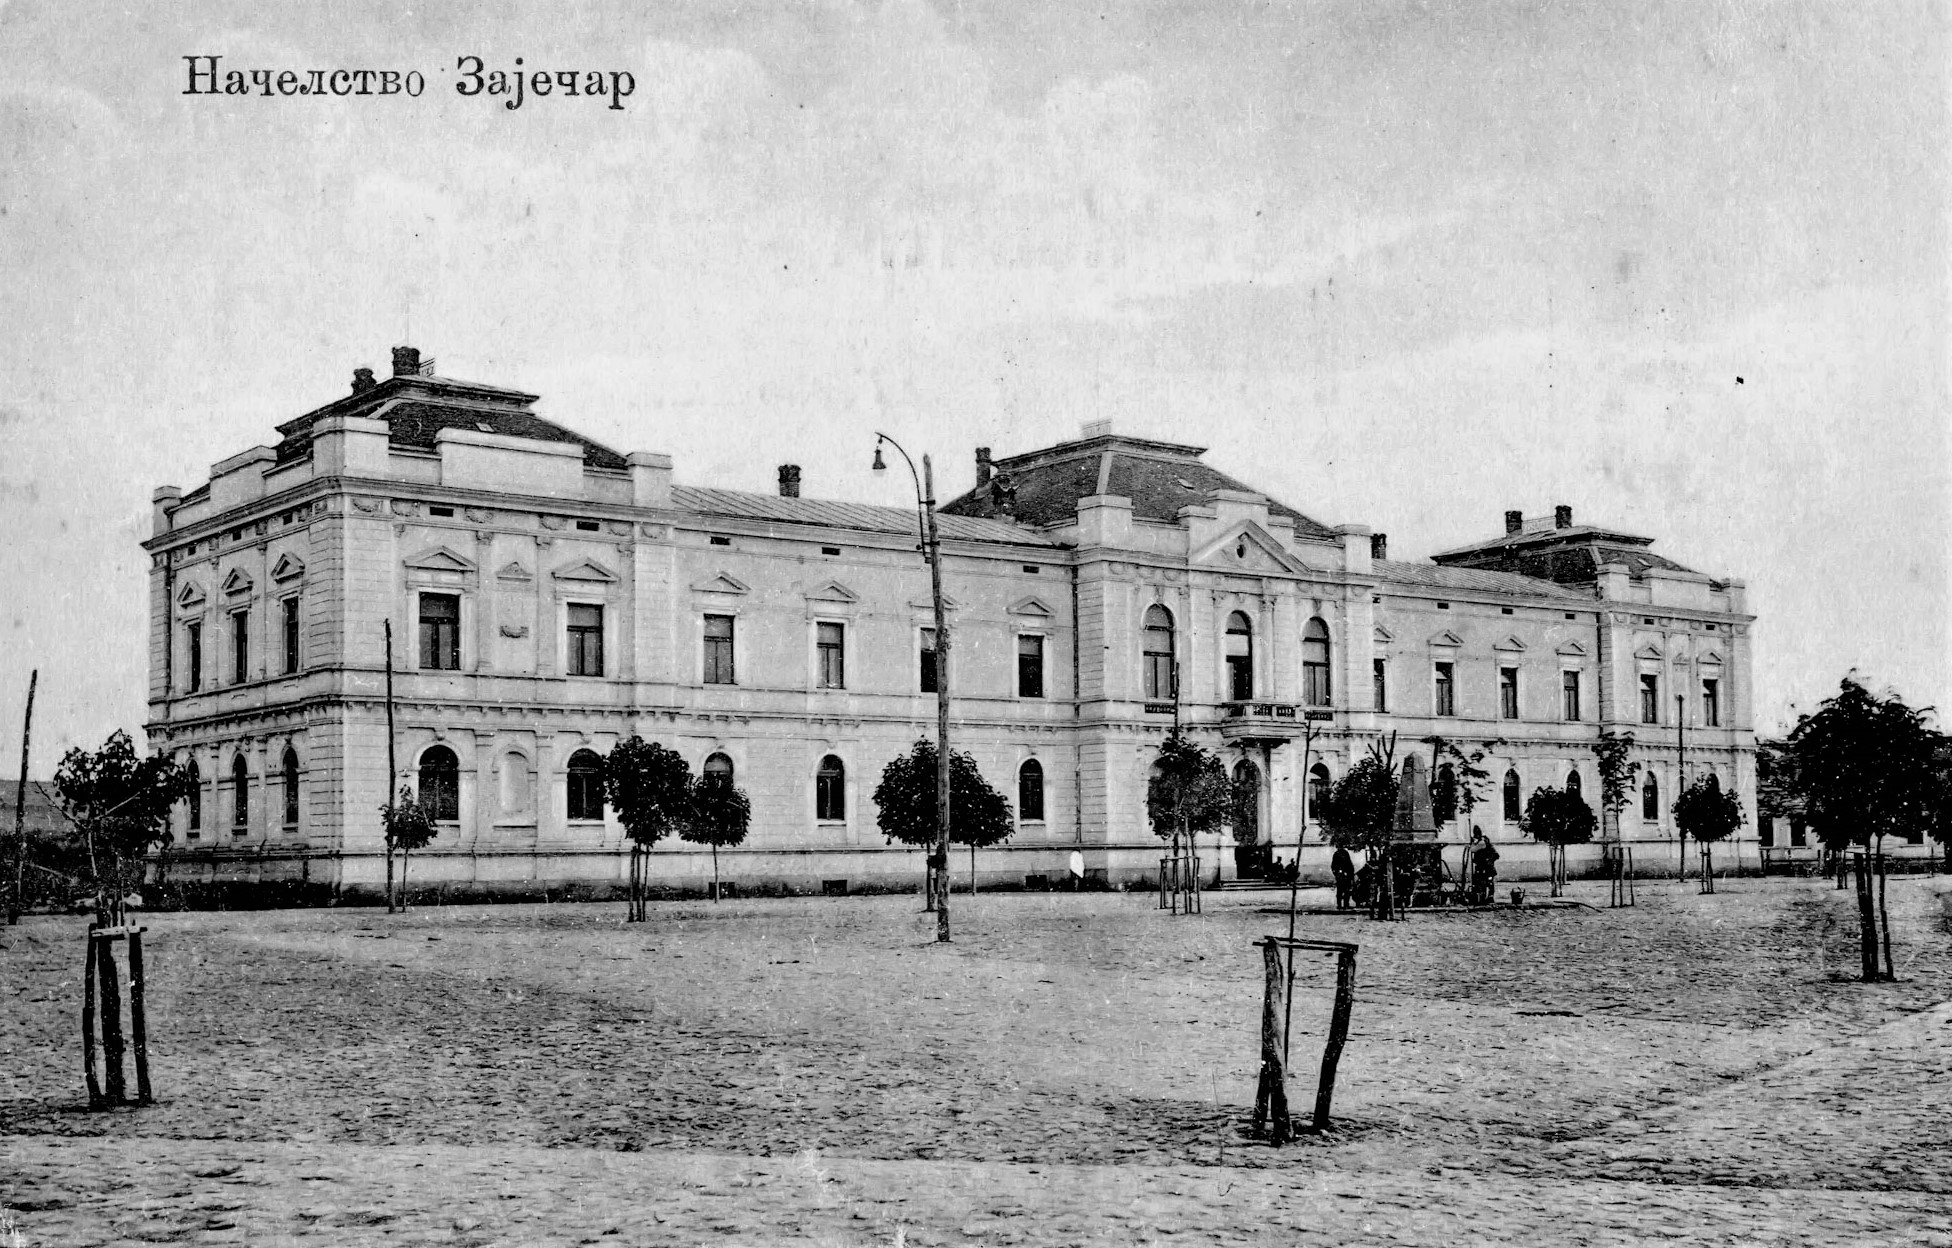 BUILDING OF THE DISTRICT ADMINISTRATION WAS BUILT